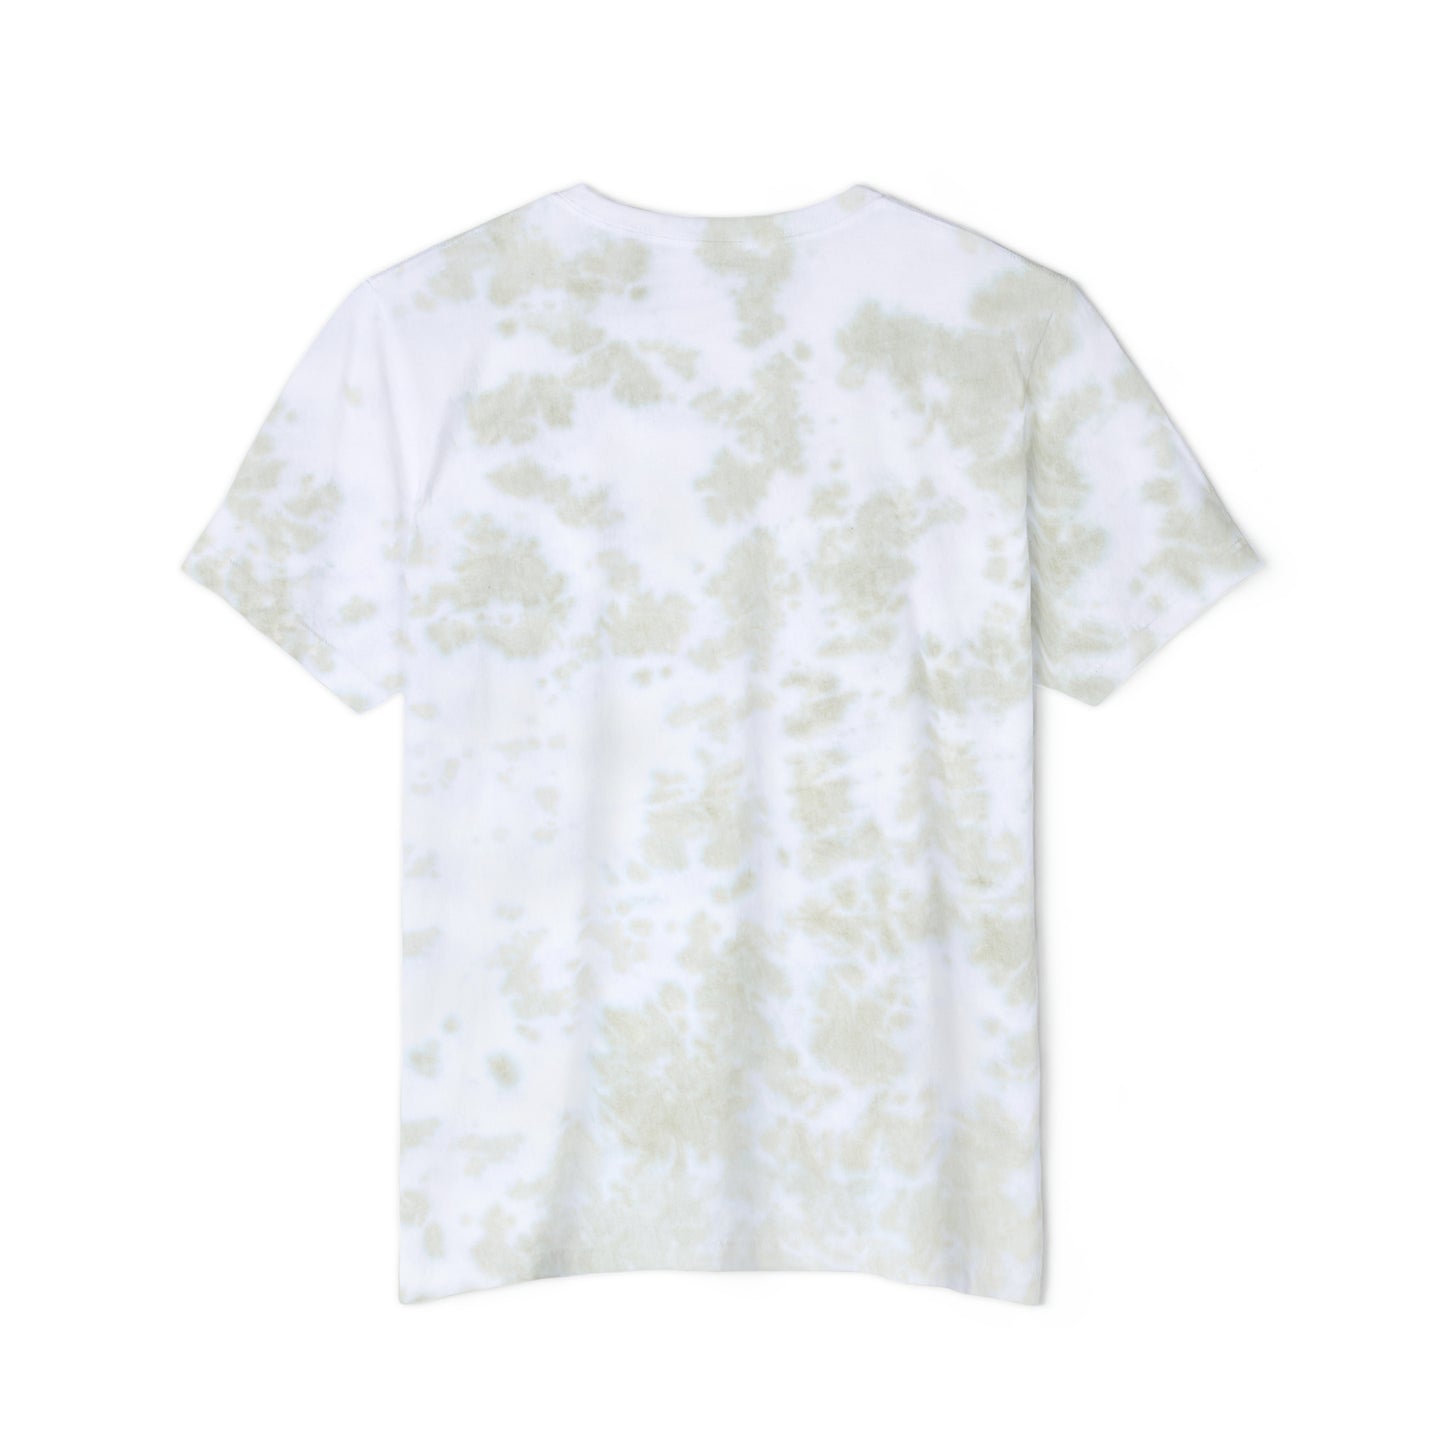 Been Dope Supply Presents: Worldwide Comedy Tour | FWD Fashion Tie-Dyed T-Shirt